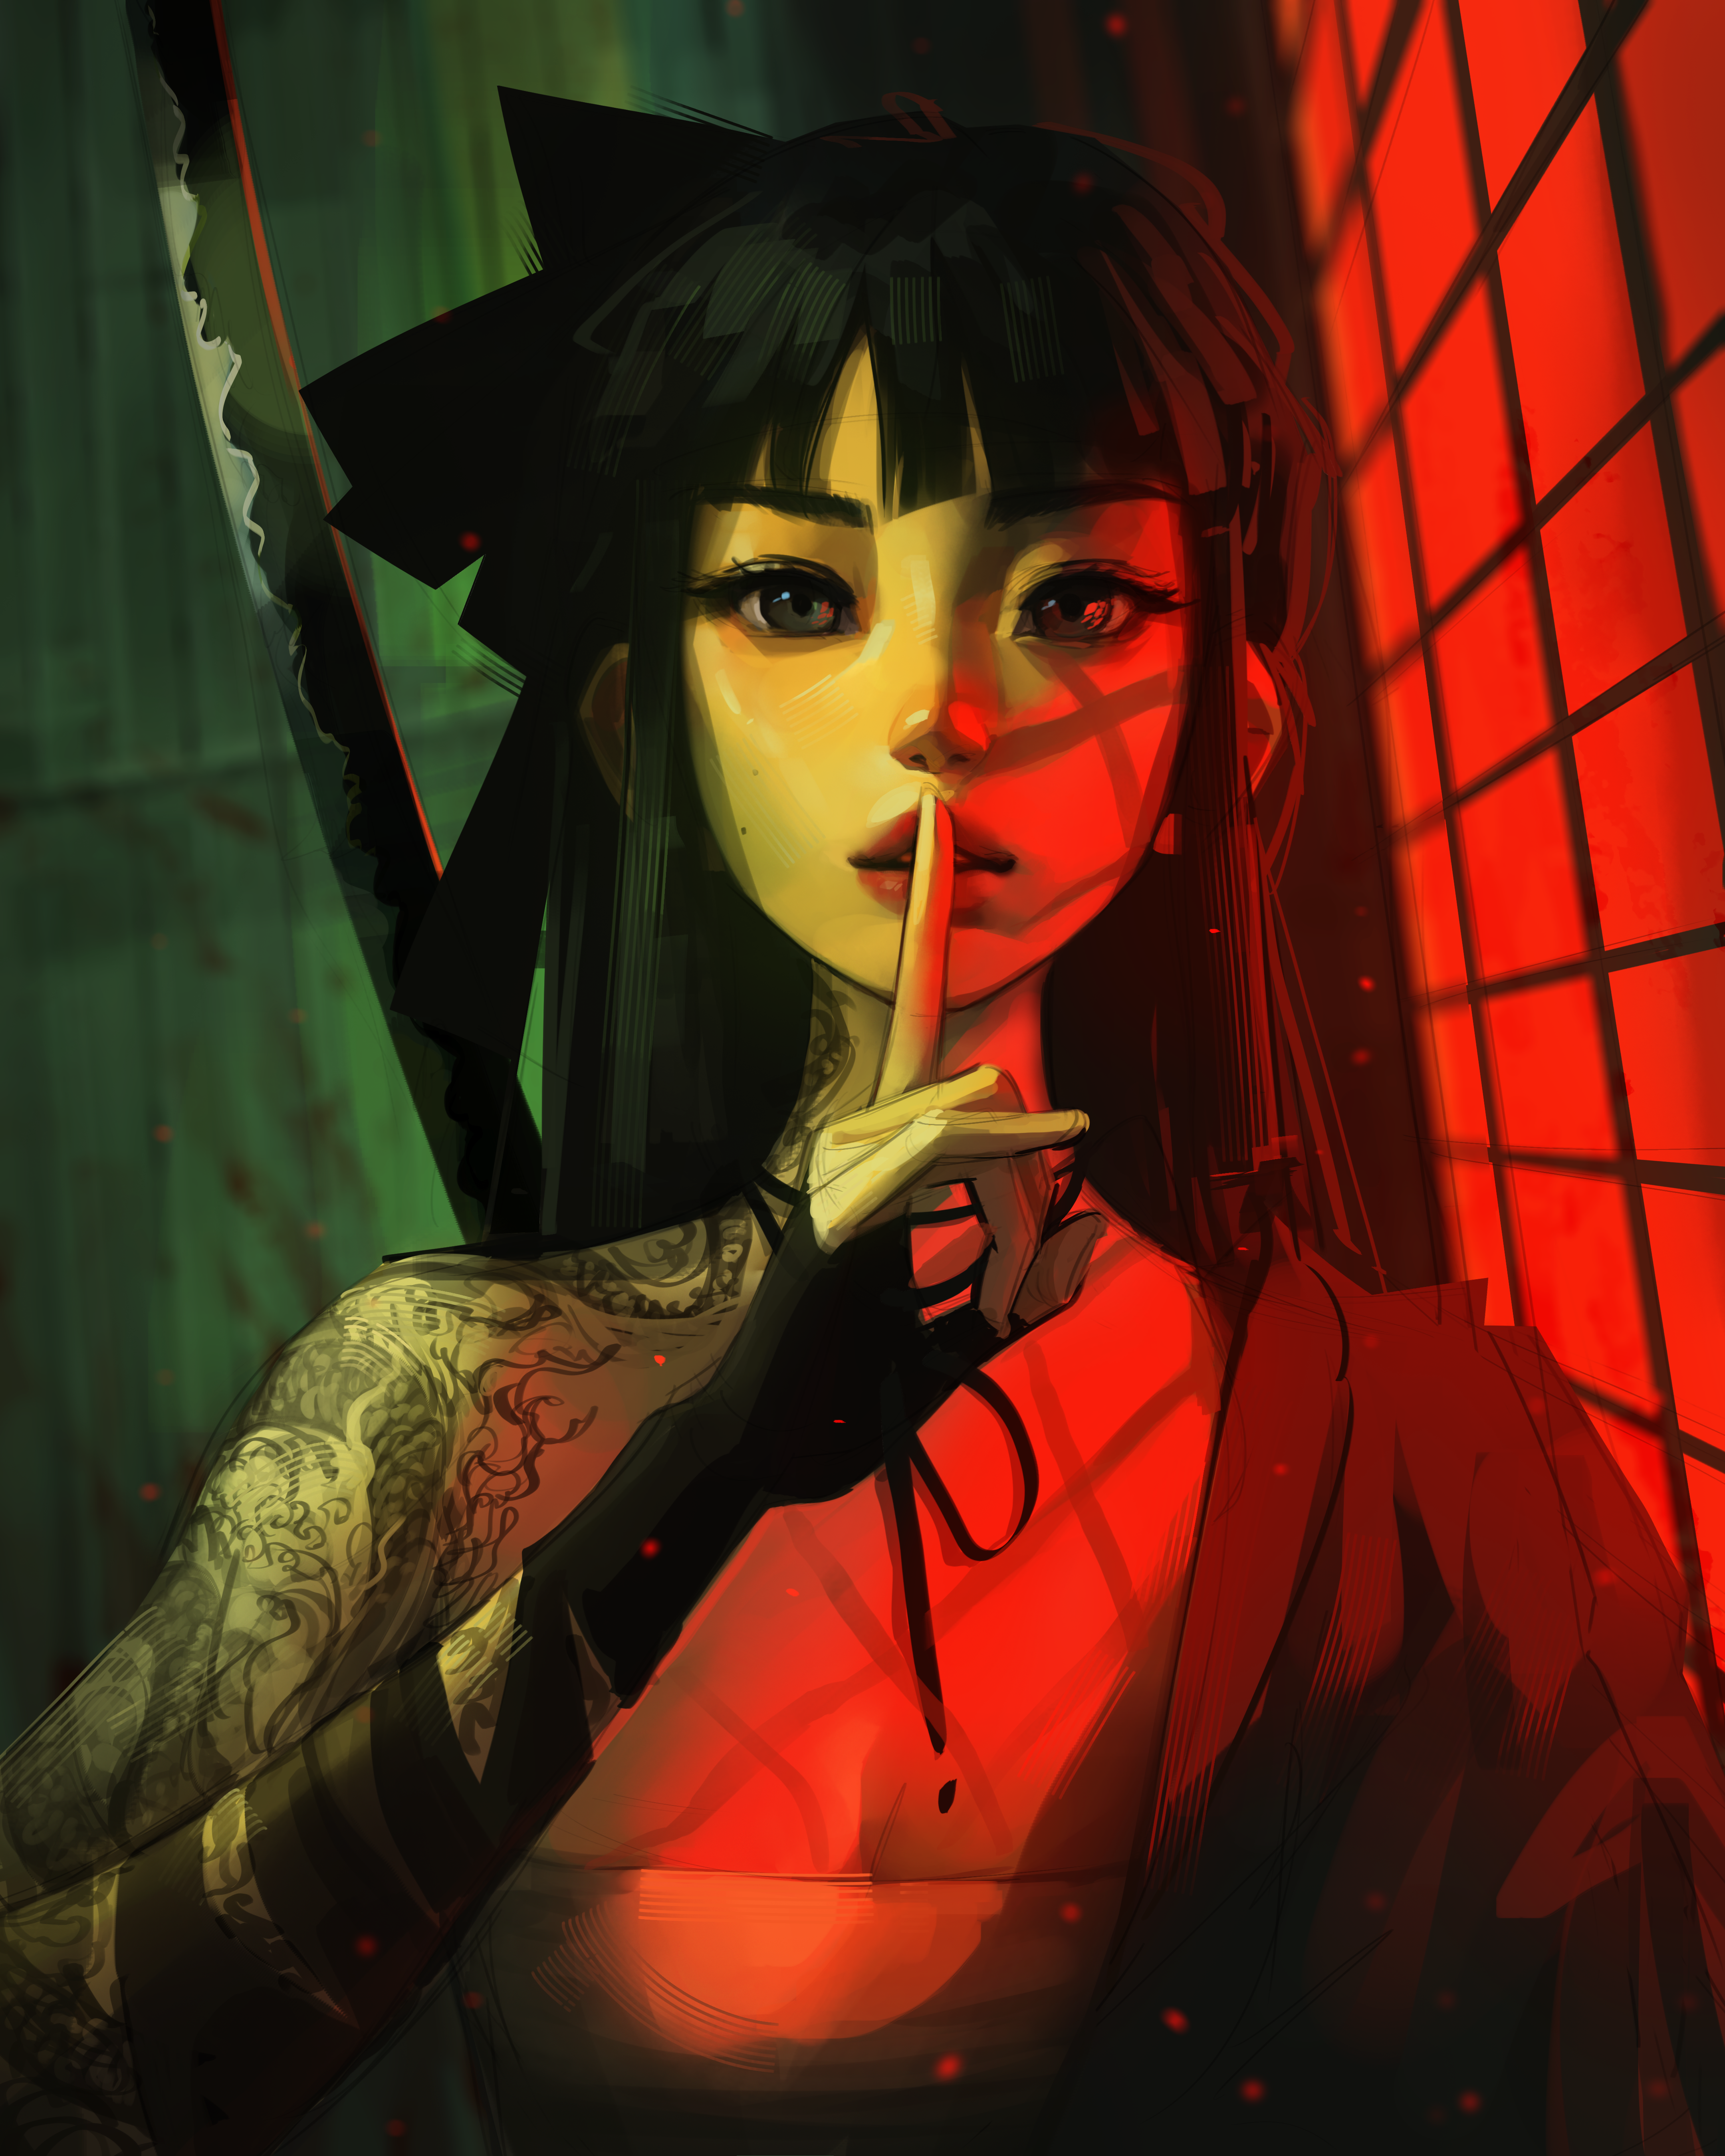 General 4320x5400 Sam Yang digital art artwork illustration portrait long hair dark hair tattoo katana looking at viewer red light silence hand gesture drawing women with swords fingers women frontal view portrait display parted lips